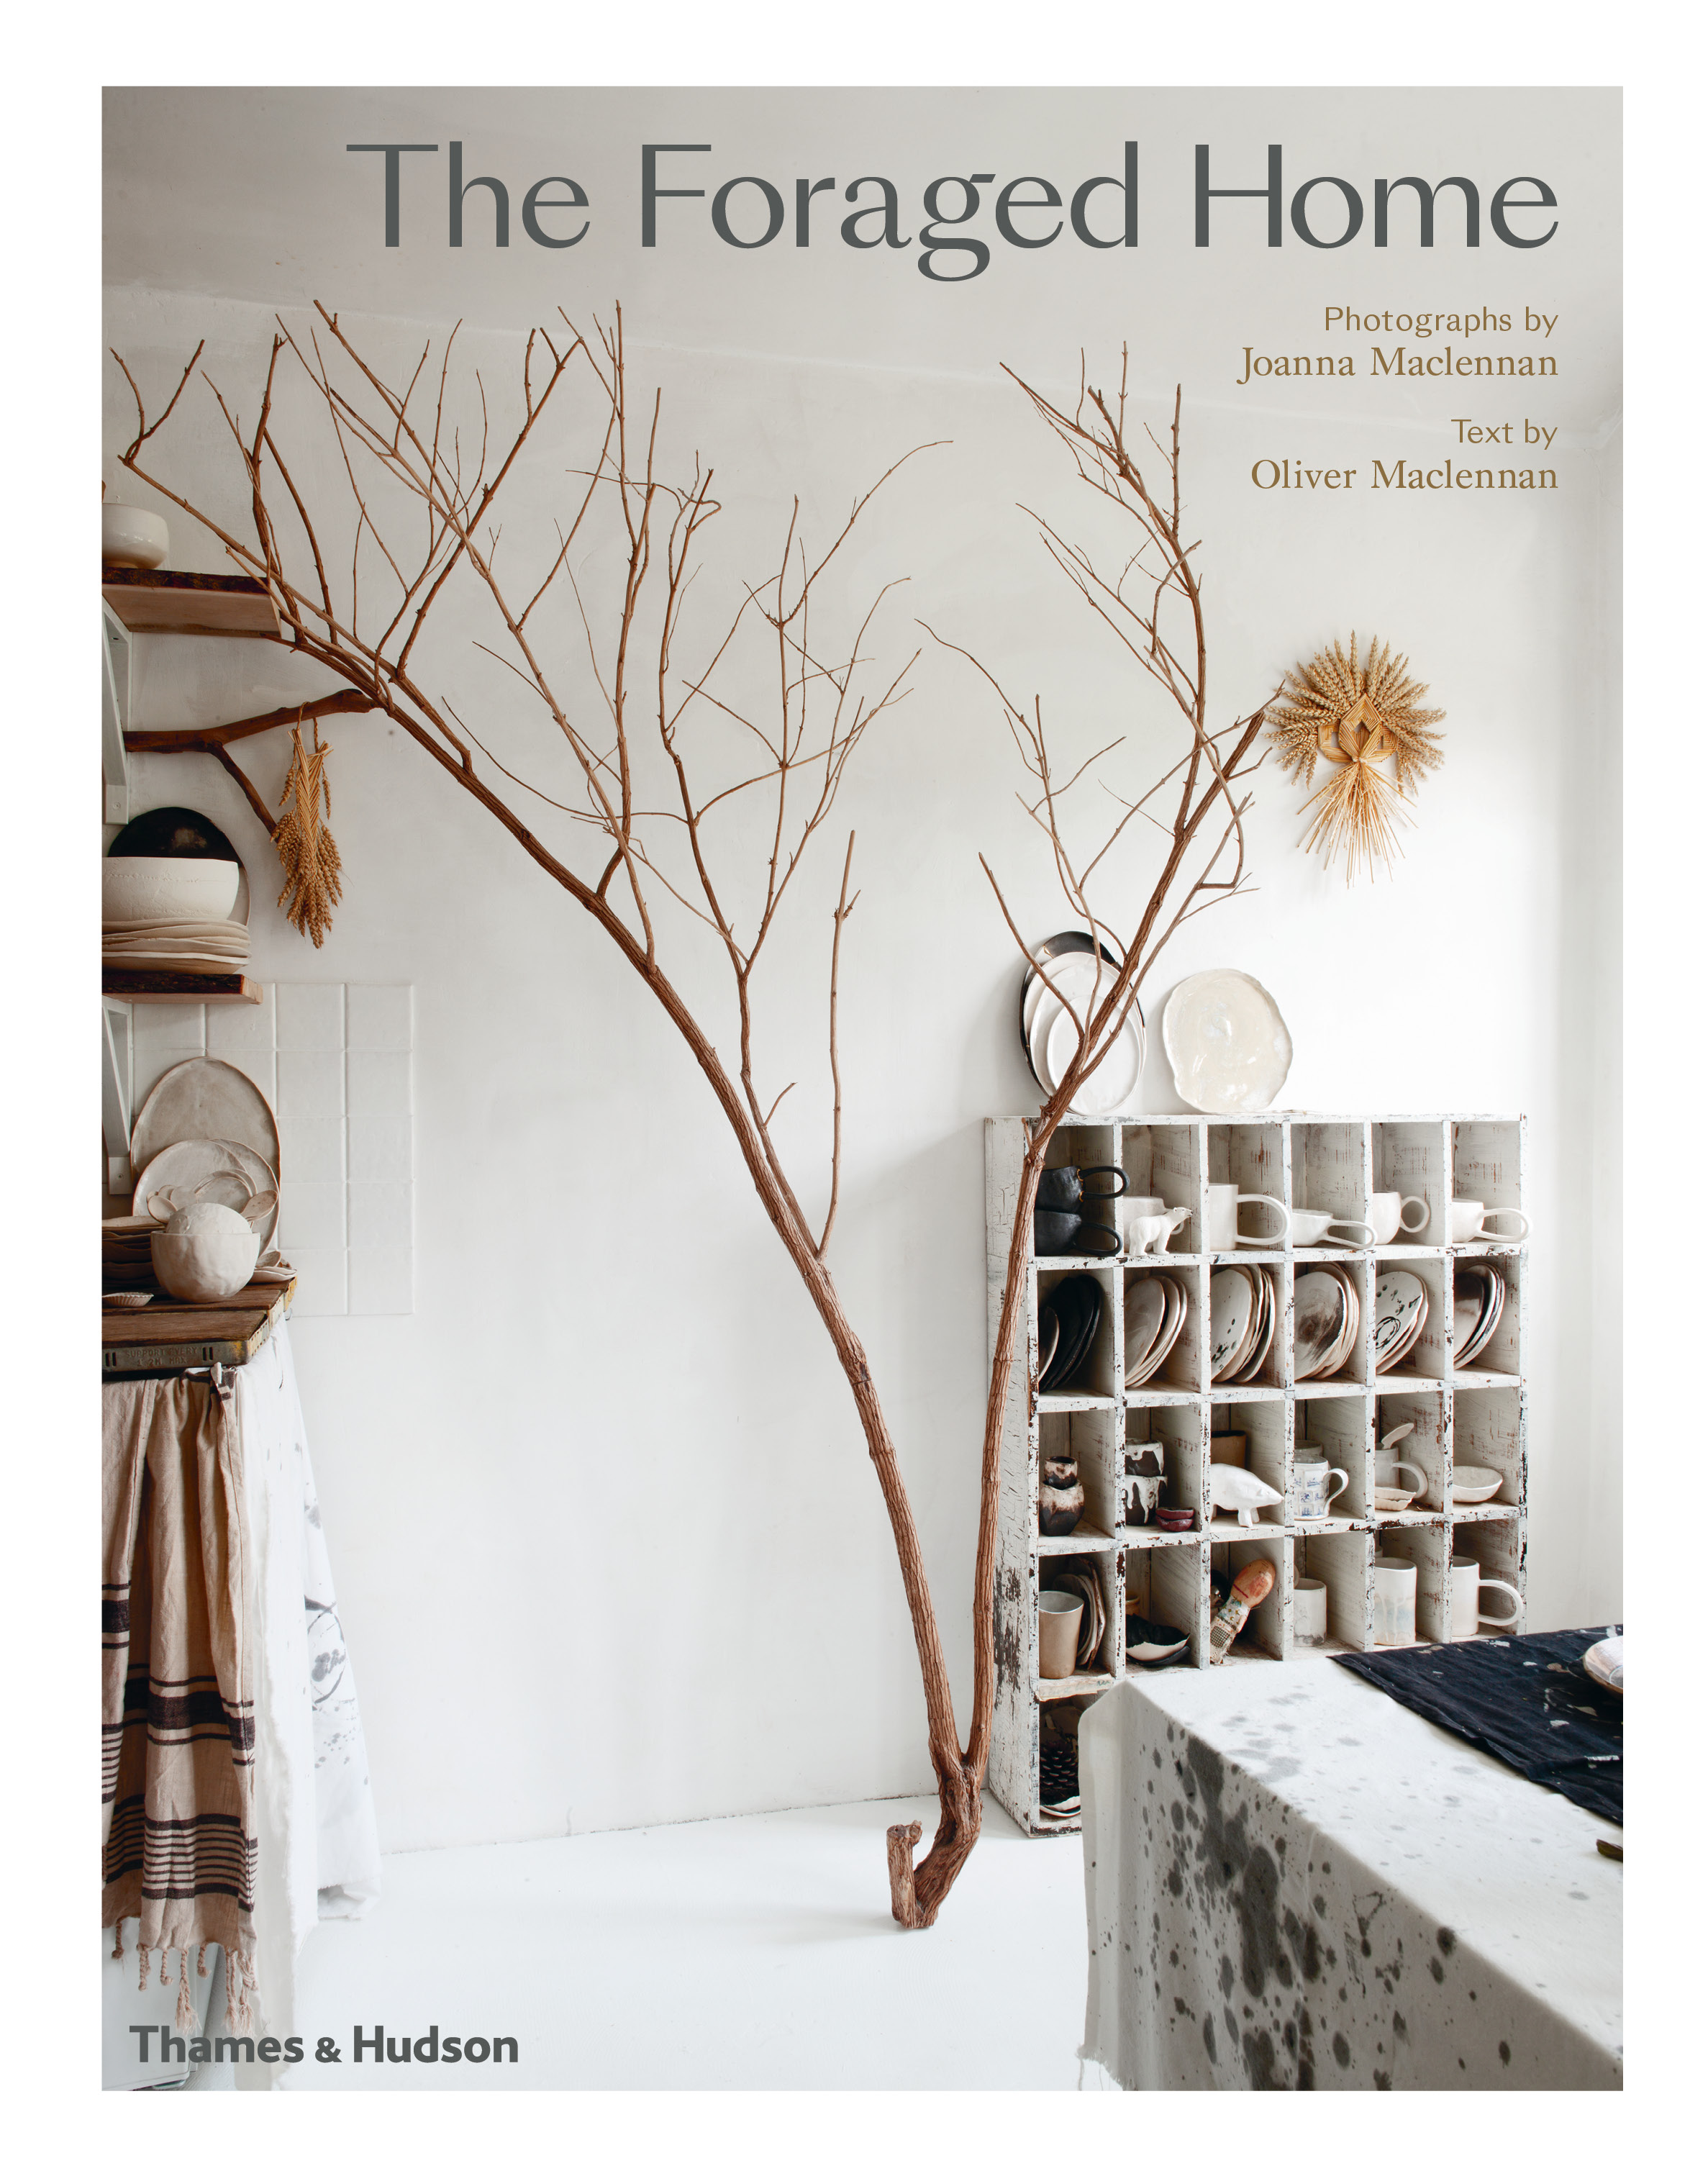 The Foraged Home book cover